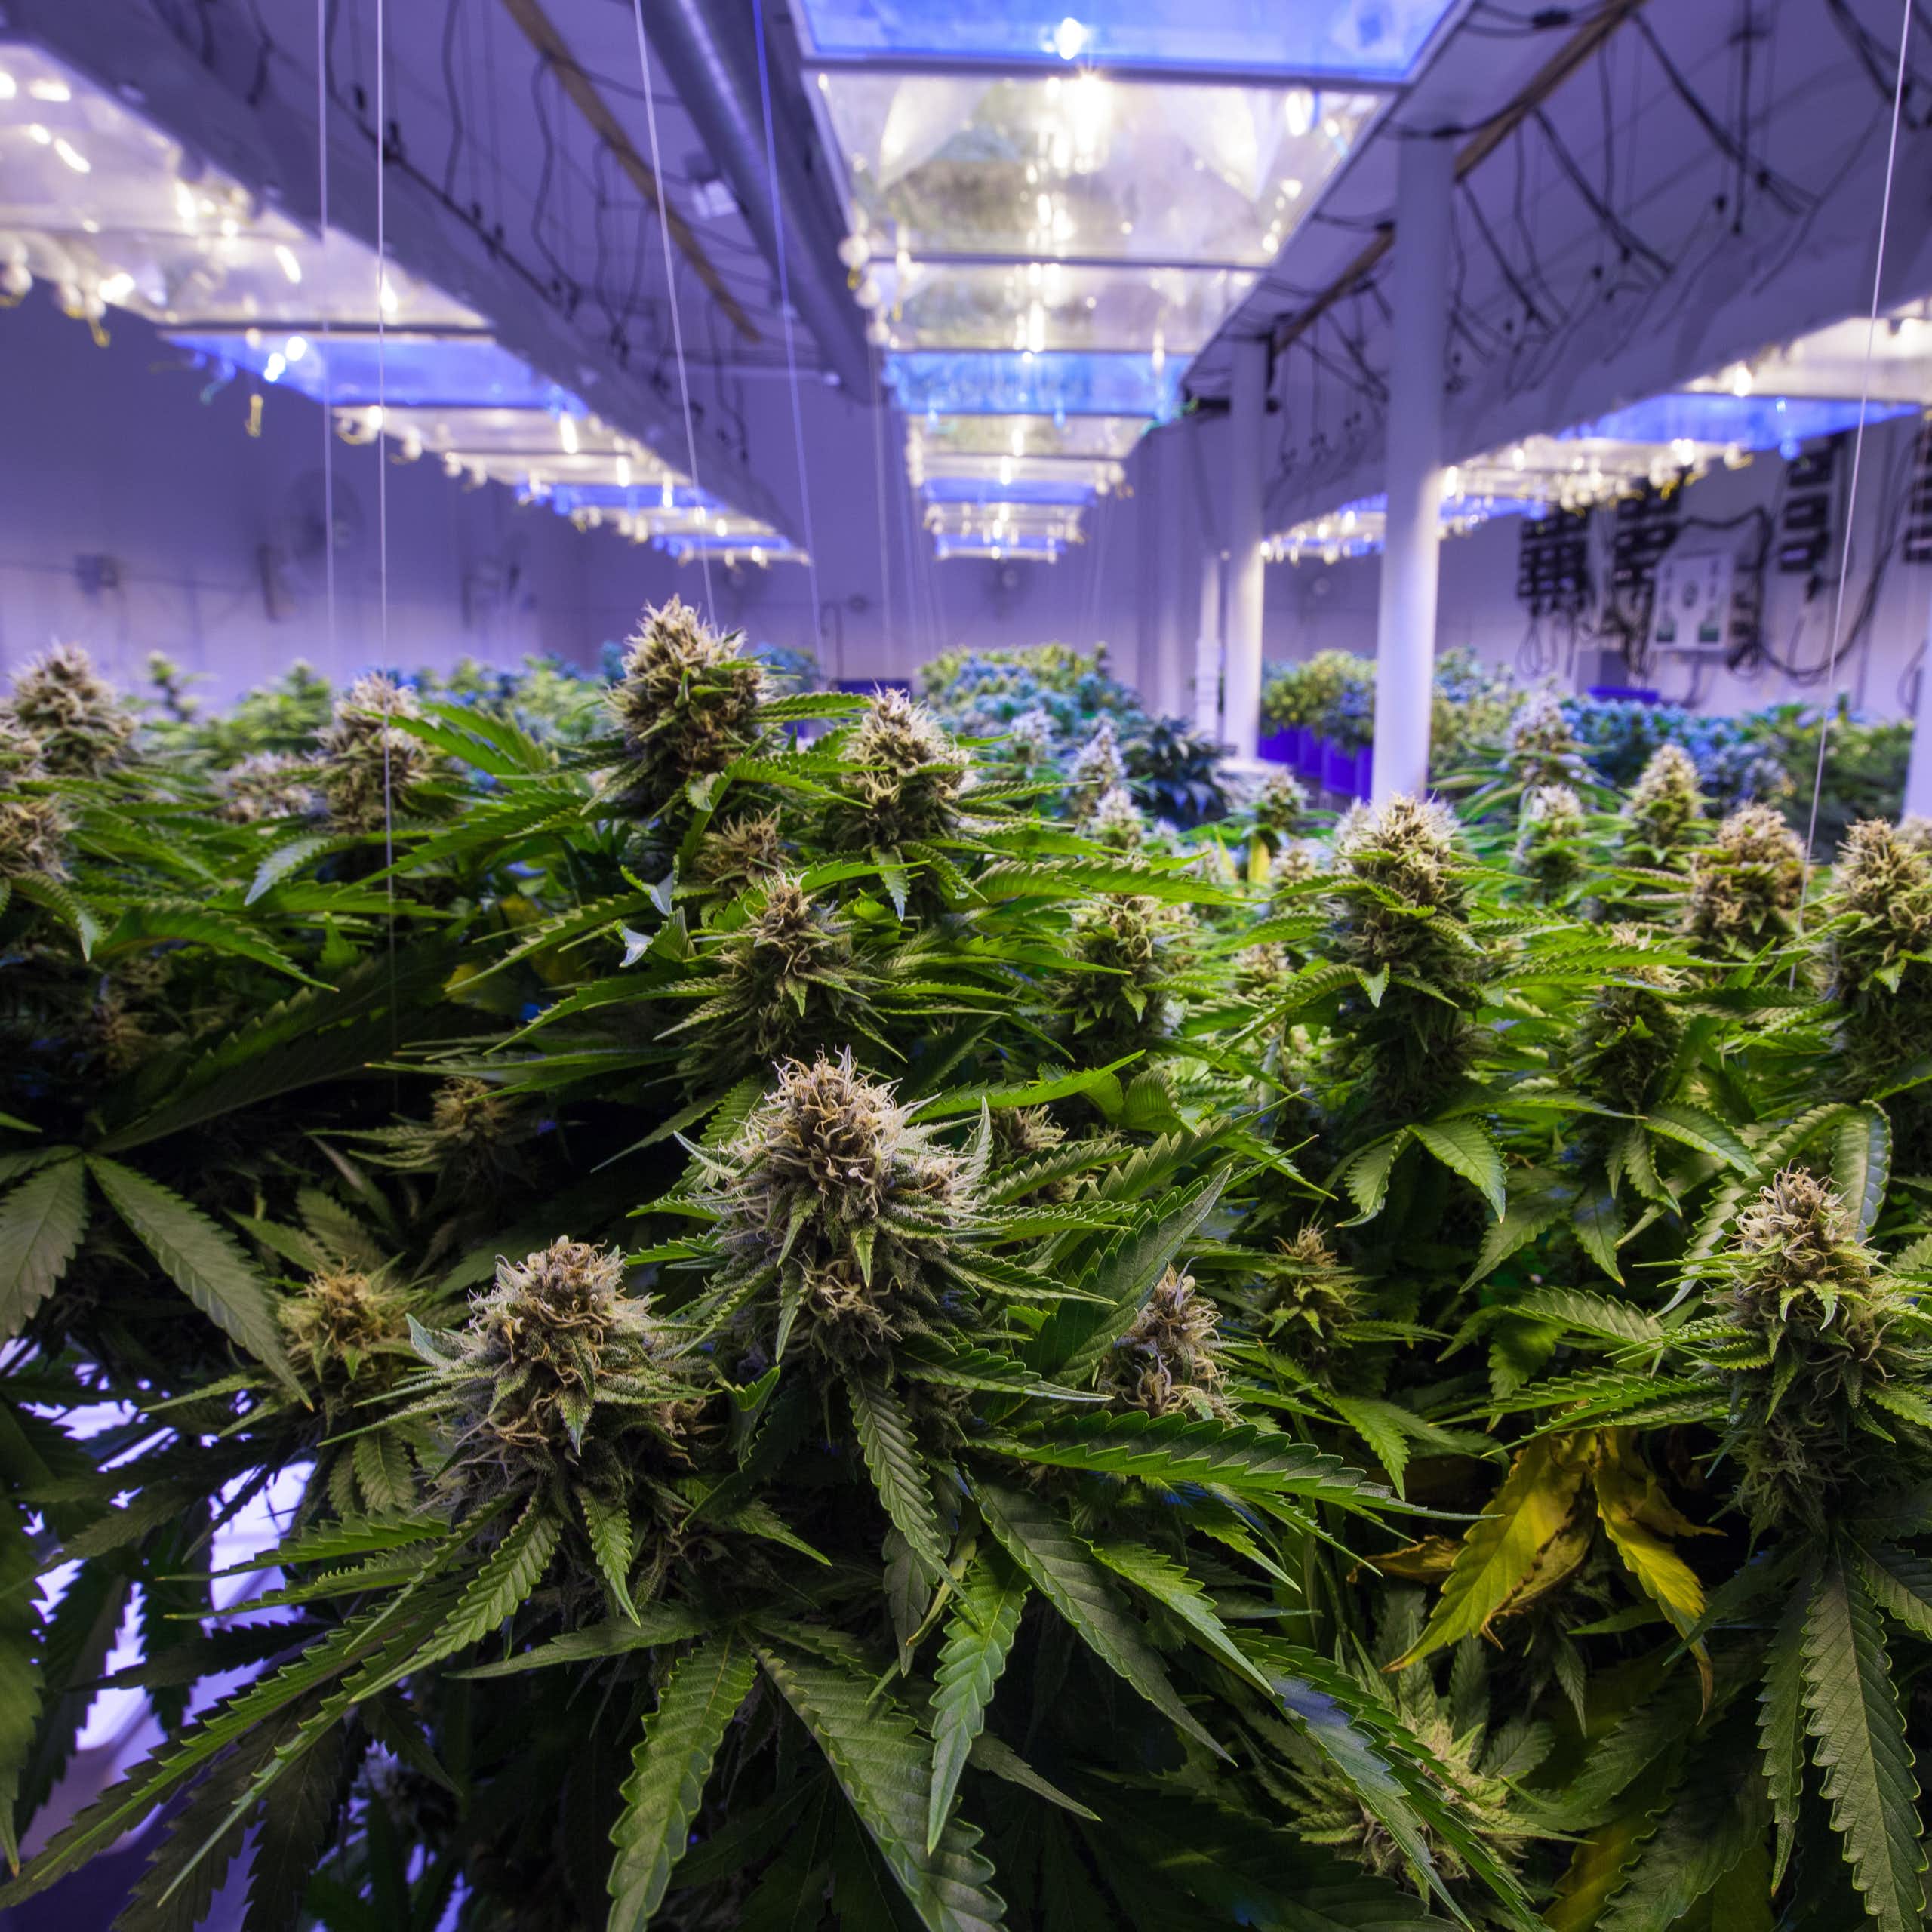 Commercial cannabis plantation growing under lights